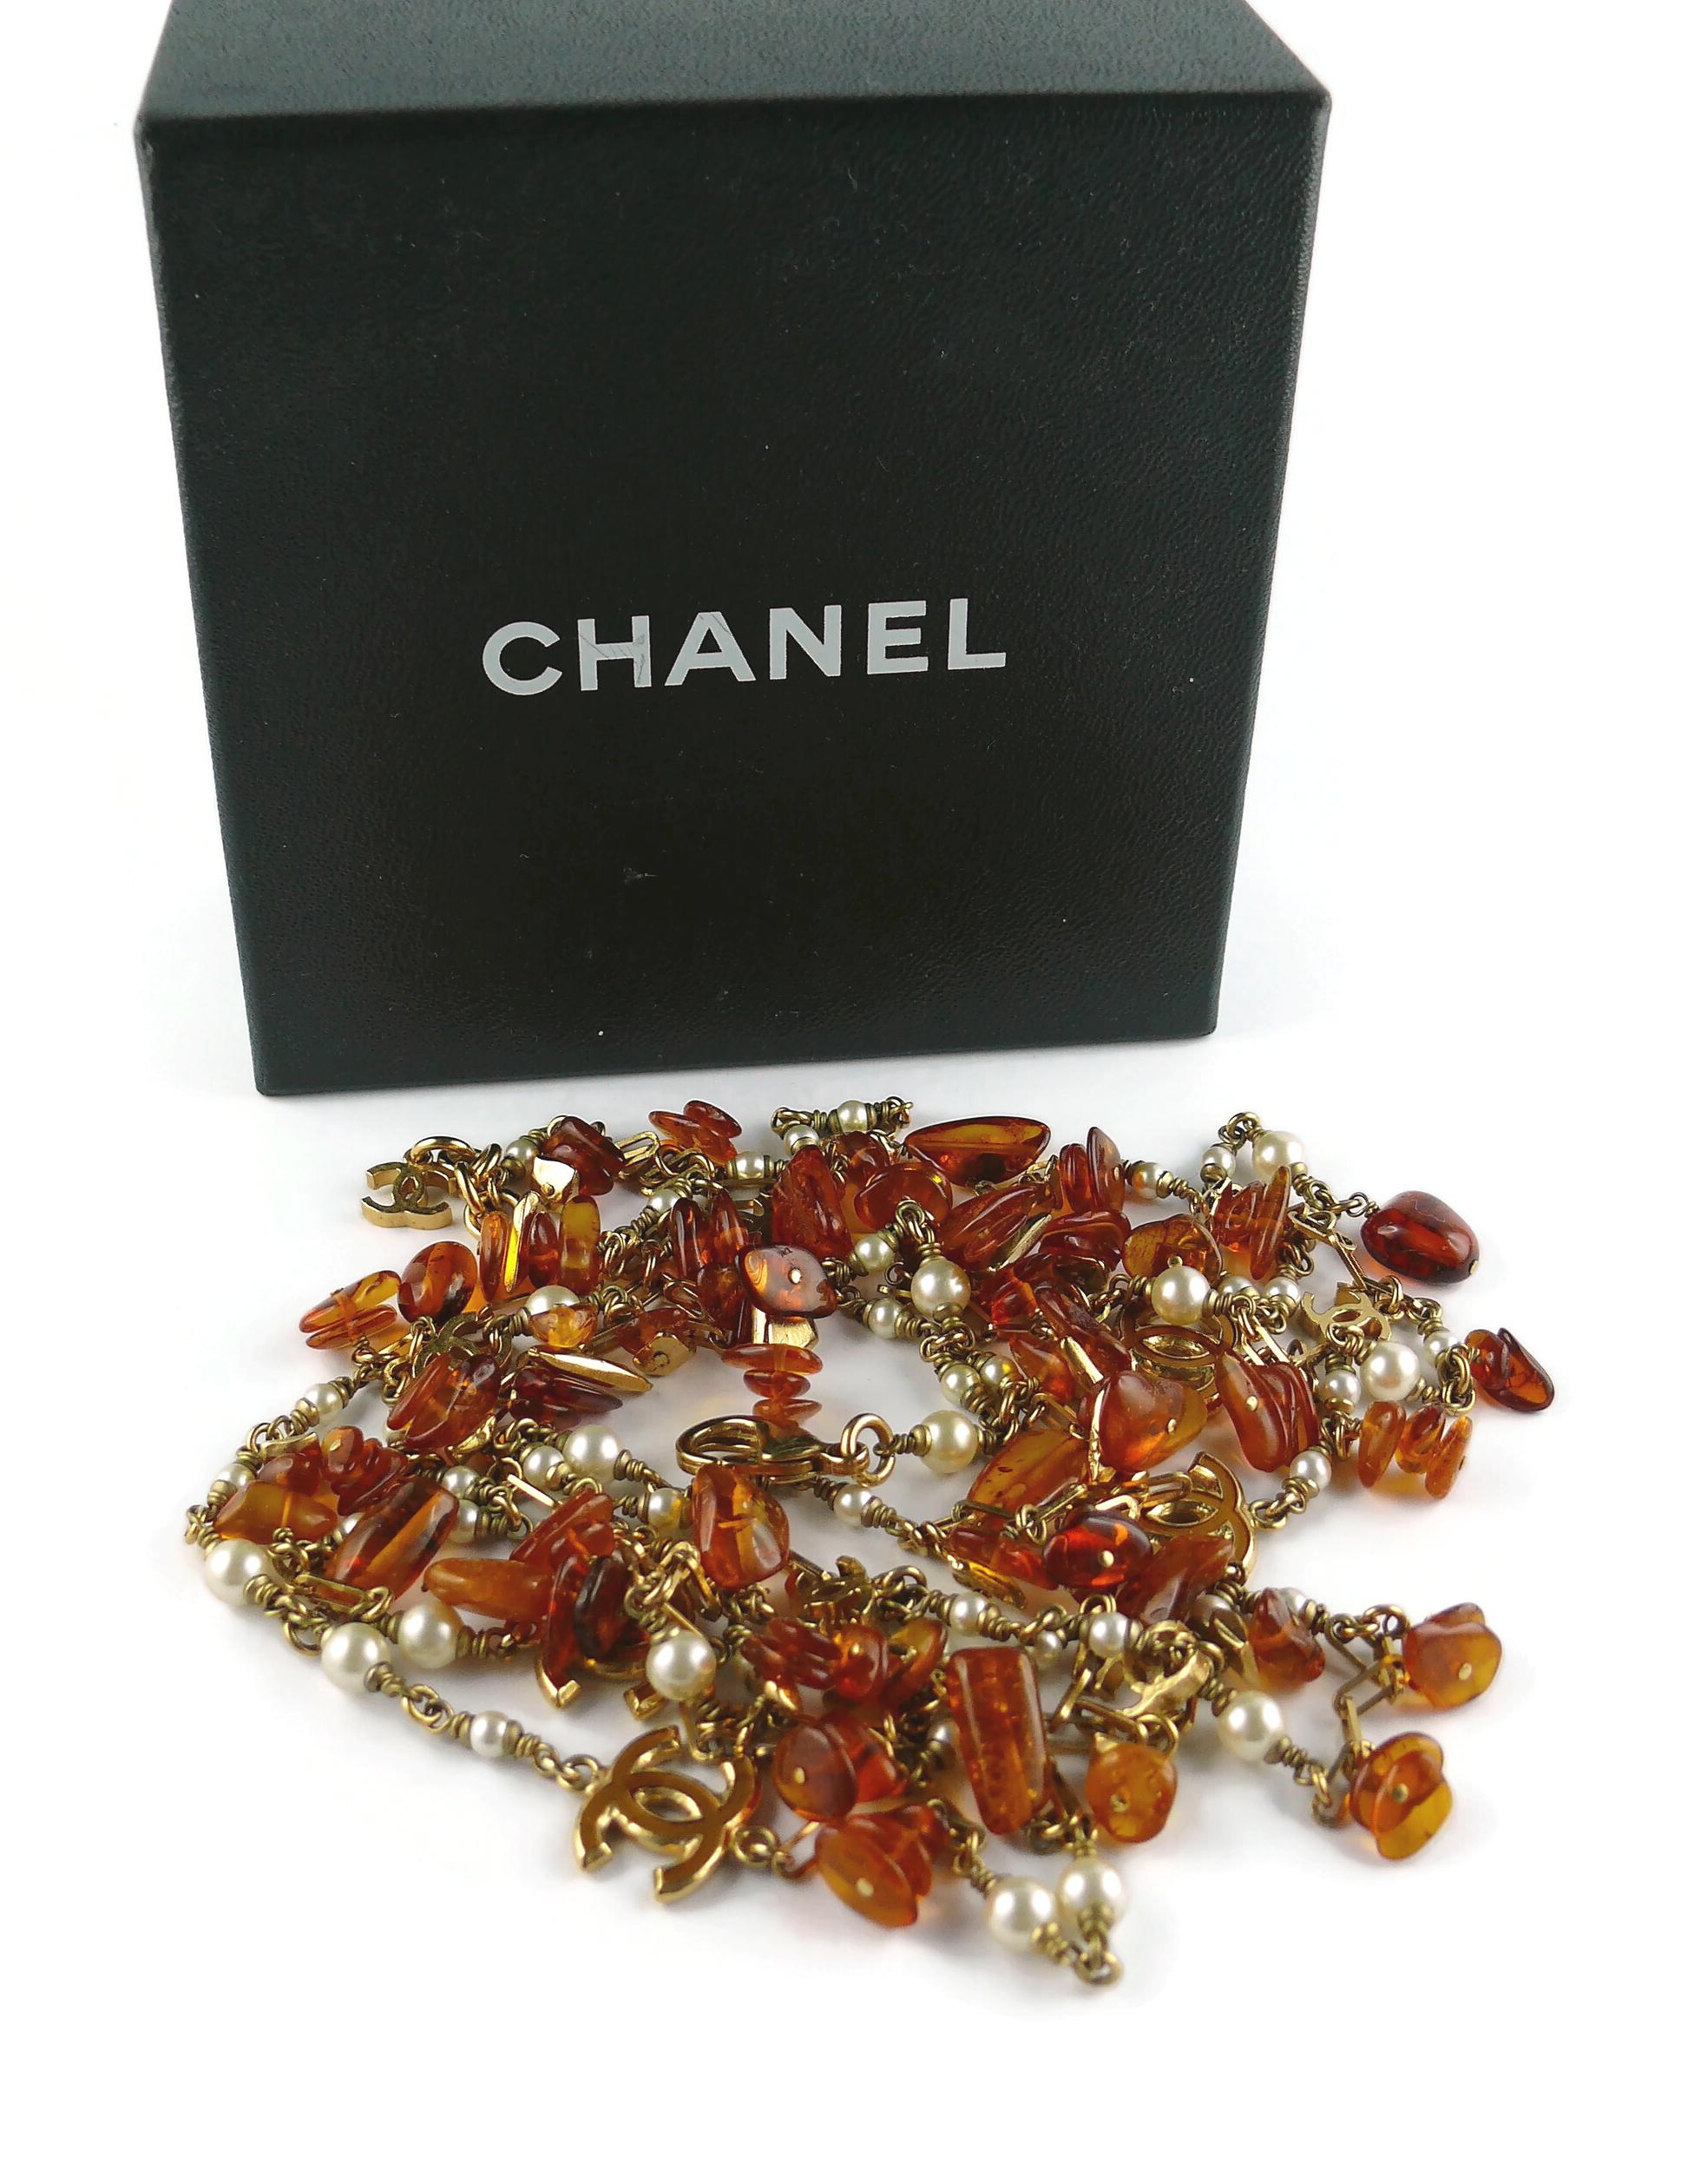 Chanel Cruise 2011 CC Logos, Resin Beads and Faux Pearl Sautoir Necklace In Good Condition For Sale In Nice, FR